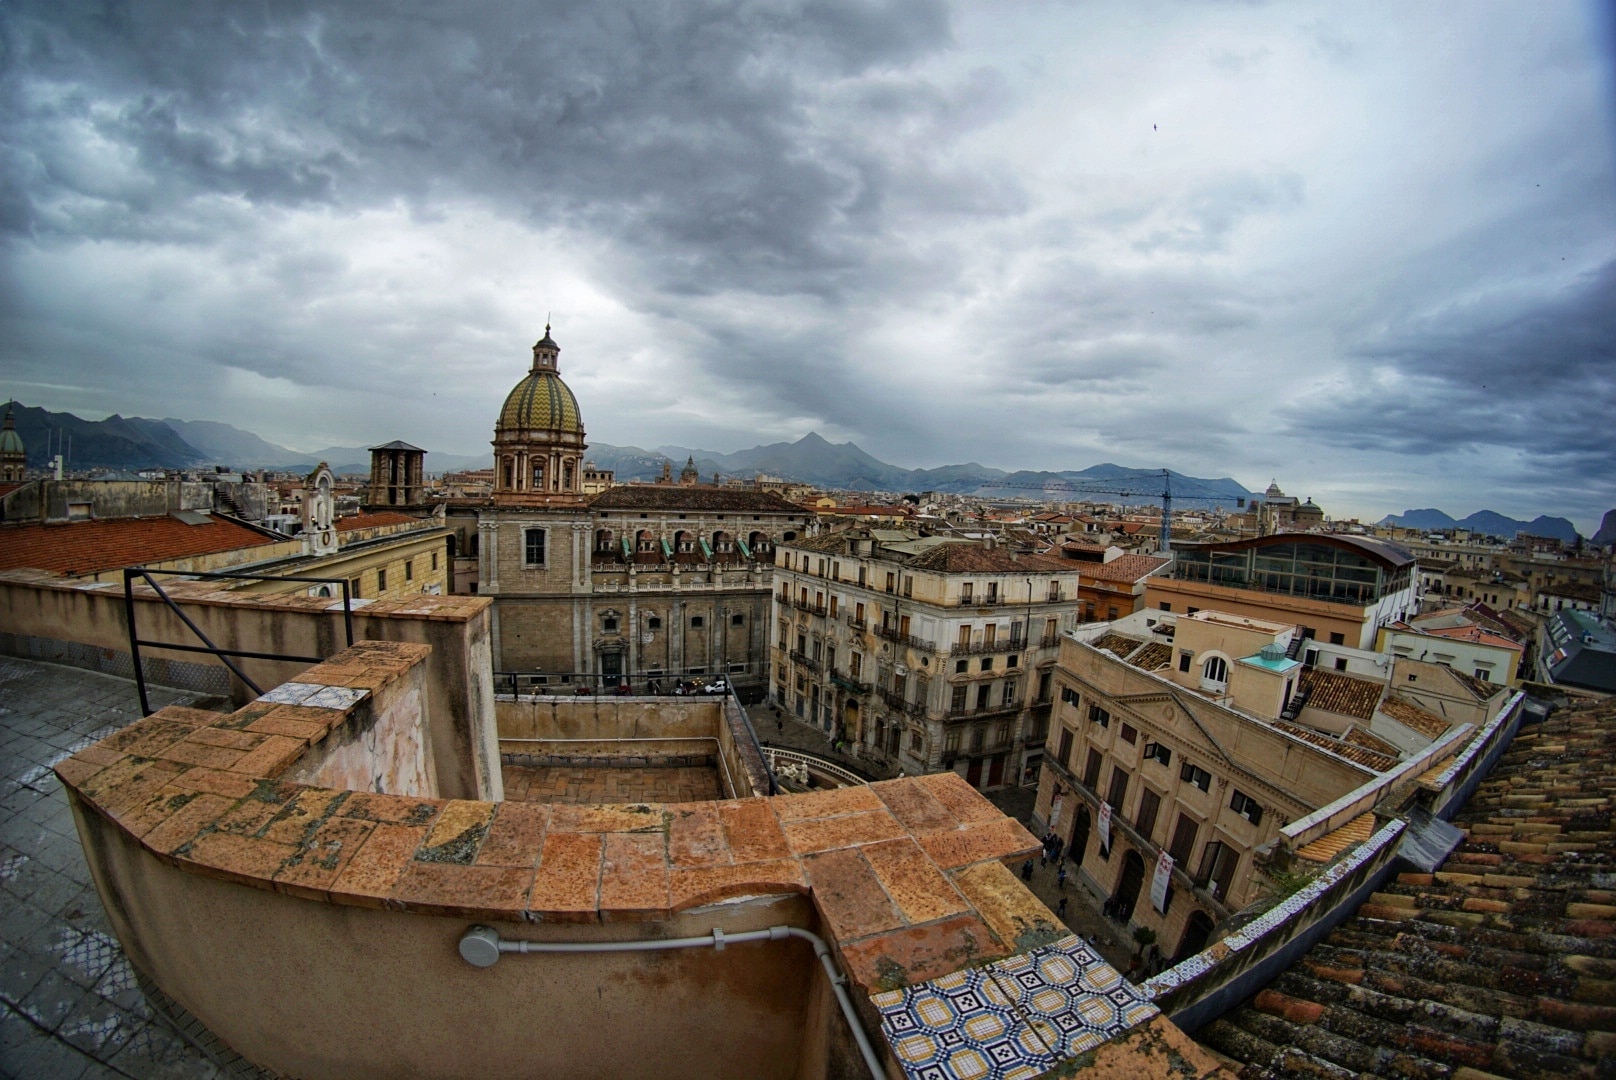 Taken from the roof of the church of Saint Catherine of Alexandria. 
Great views of the city.
Taken on a Sony a6000 with a 7artisans fisheye lens.